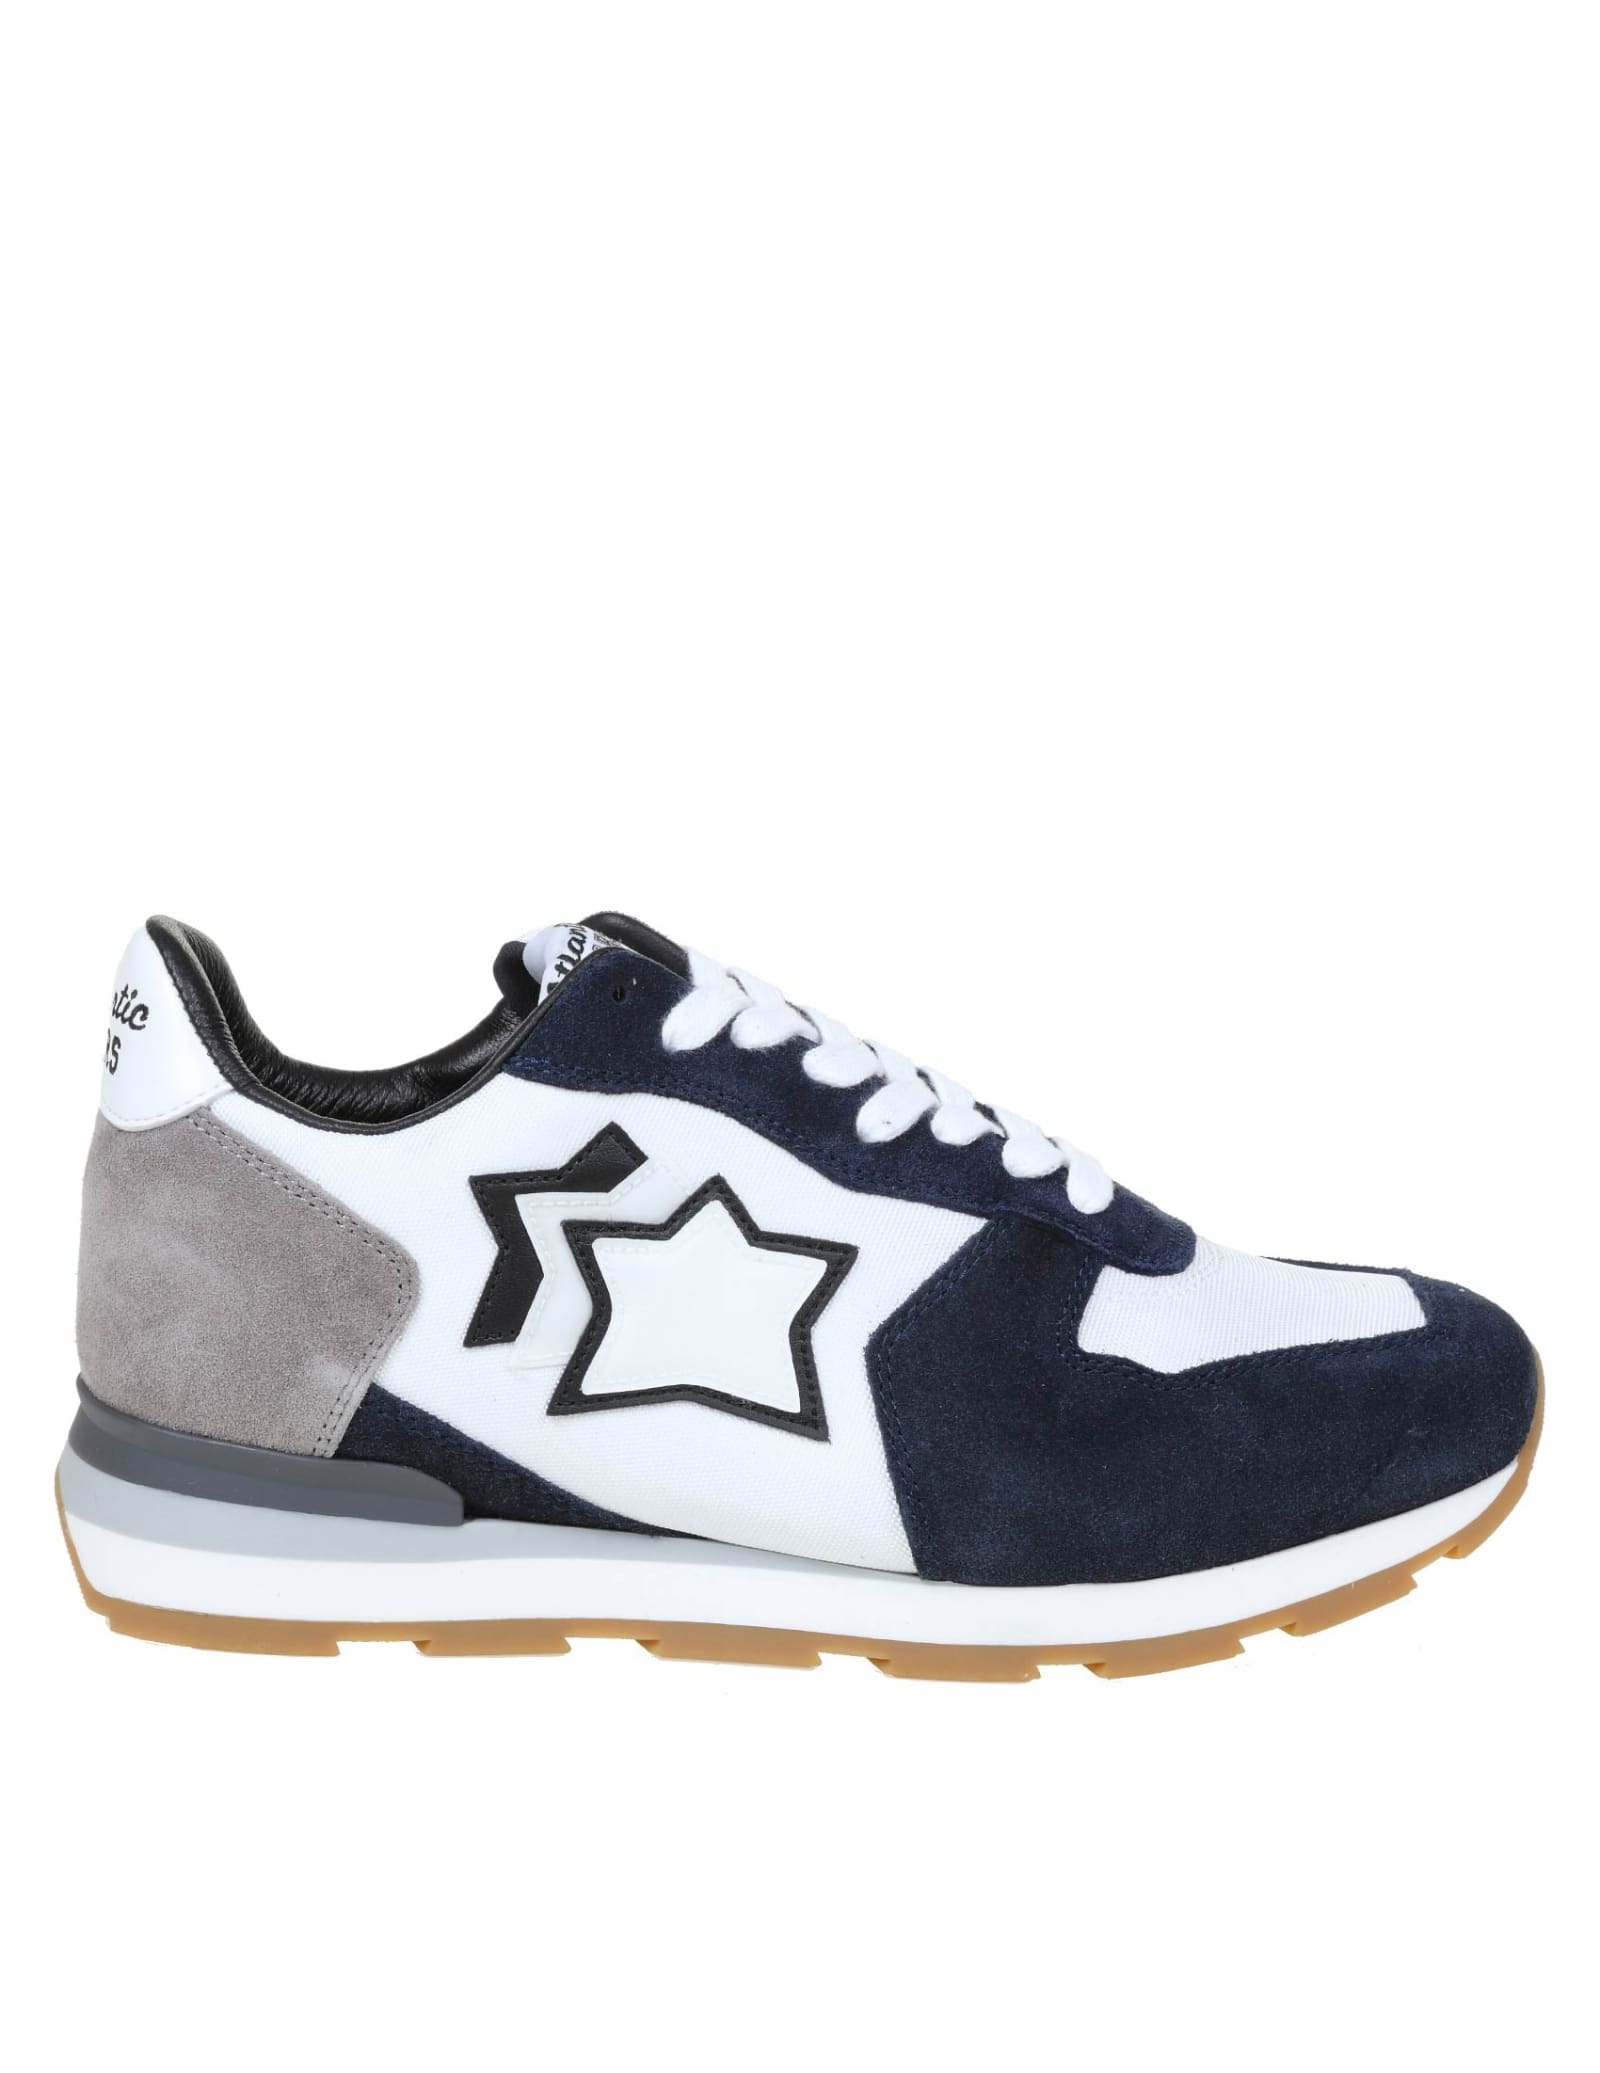 Atlantic Stars Antares Sneakers In Suede And Nylon